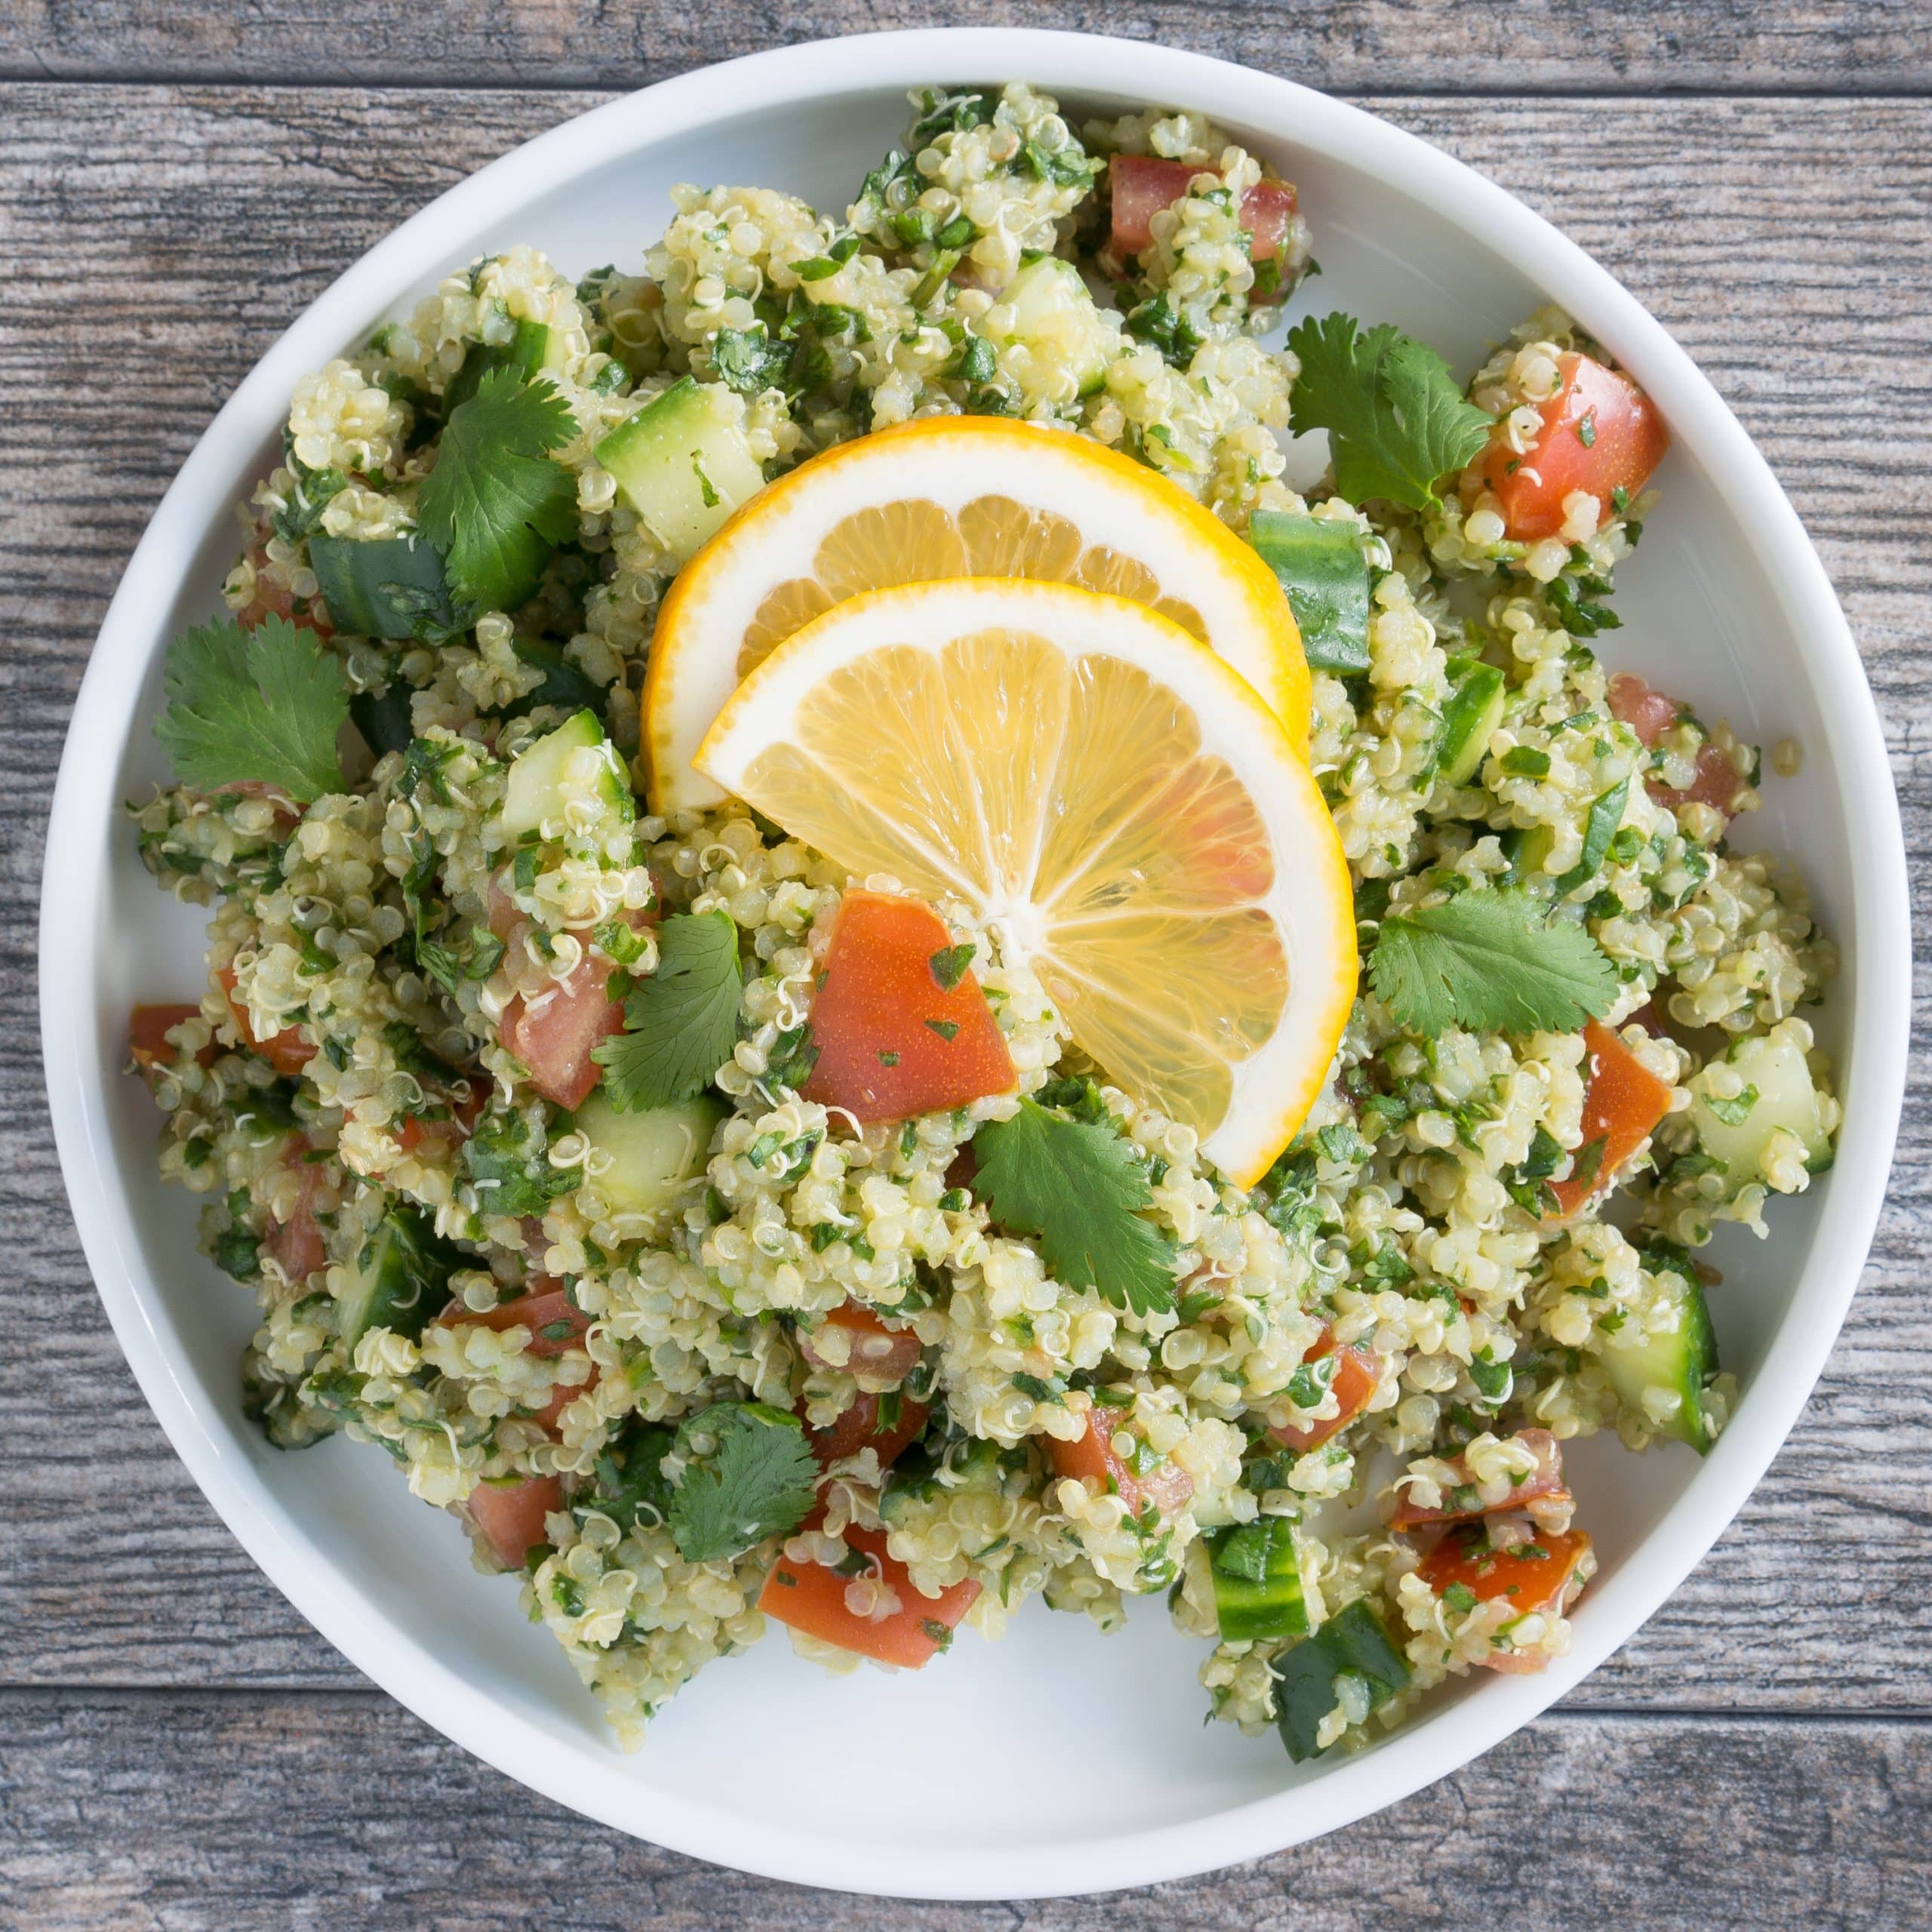 Quinoa Tabbouleh Salad – This Quinoa Tabbouleh Salad is a gluten-free version of the traditional bulgur wheat recipe. This salad has a light lemon & olive oil dressing. Plus it’s packed with chopped spinach, fresh parsley, crisp cucumber, tomato, and quinoa! ♥ | freeyourfork.com